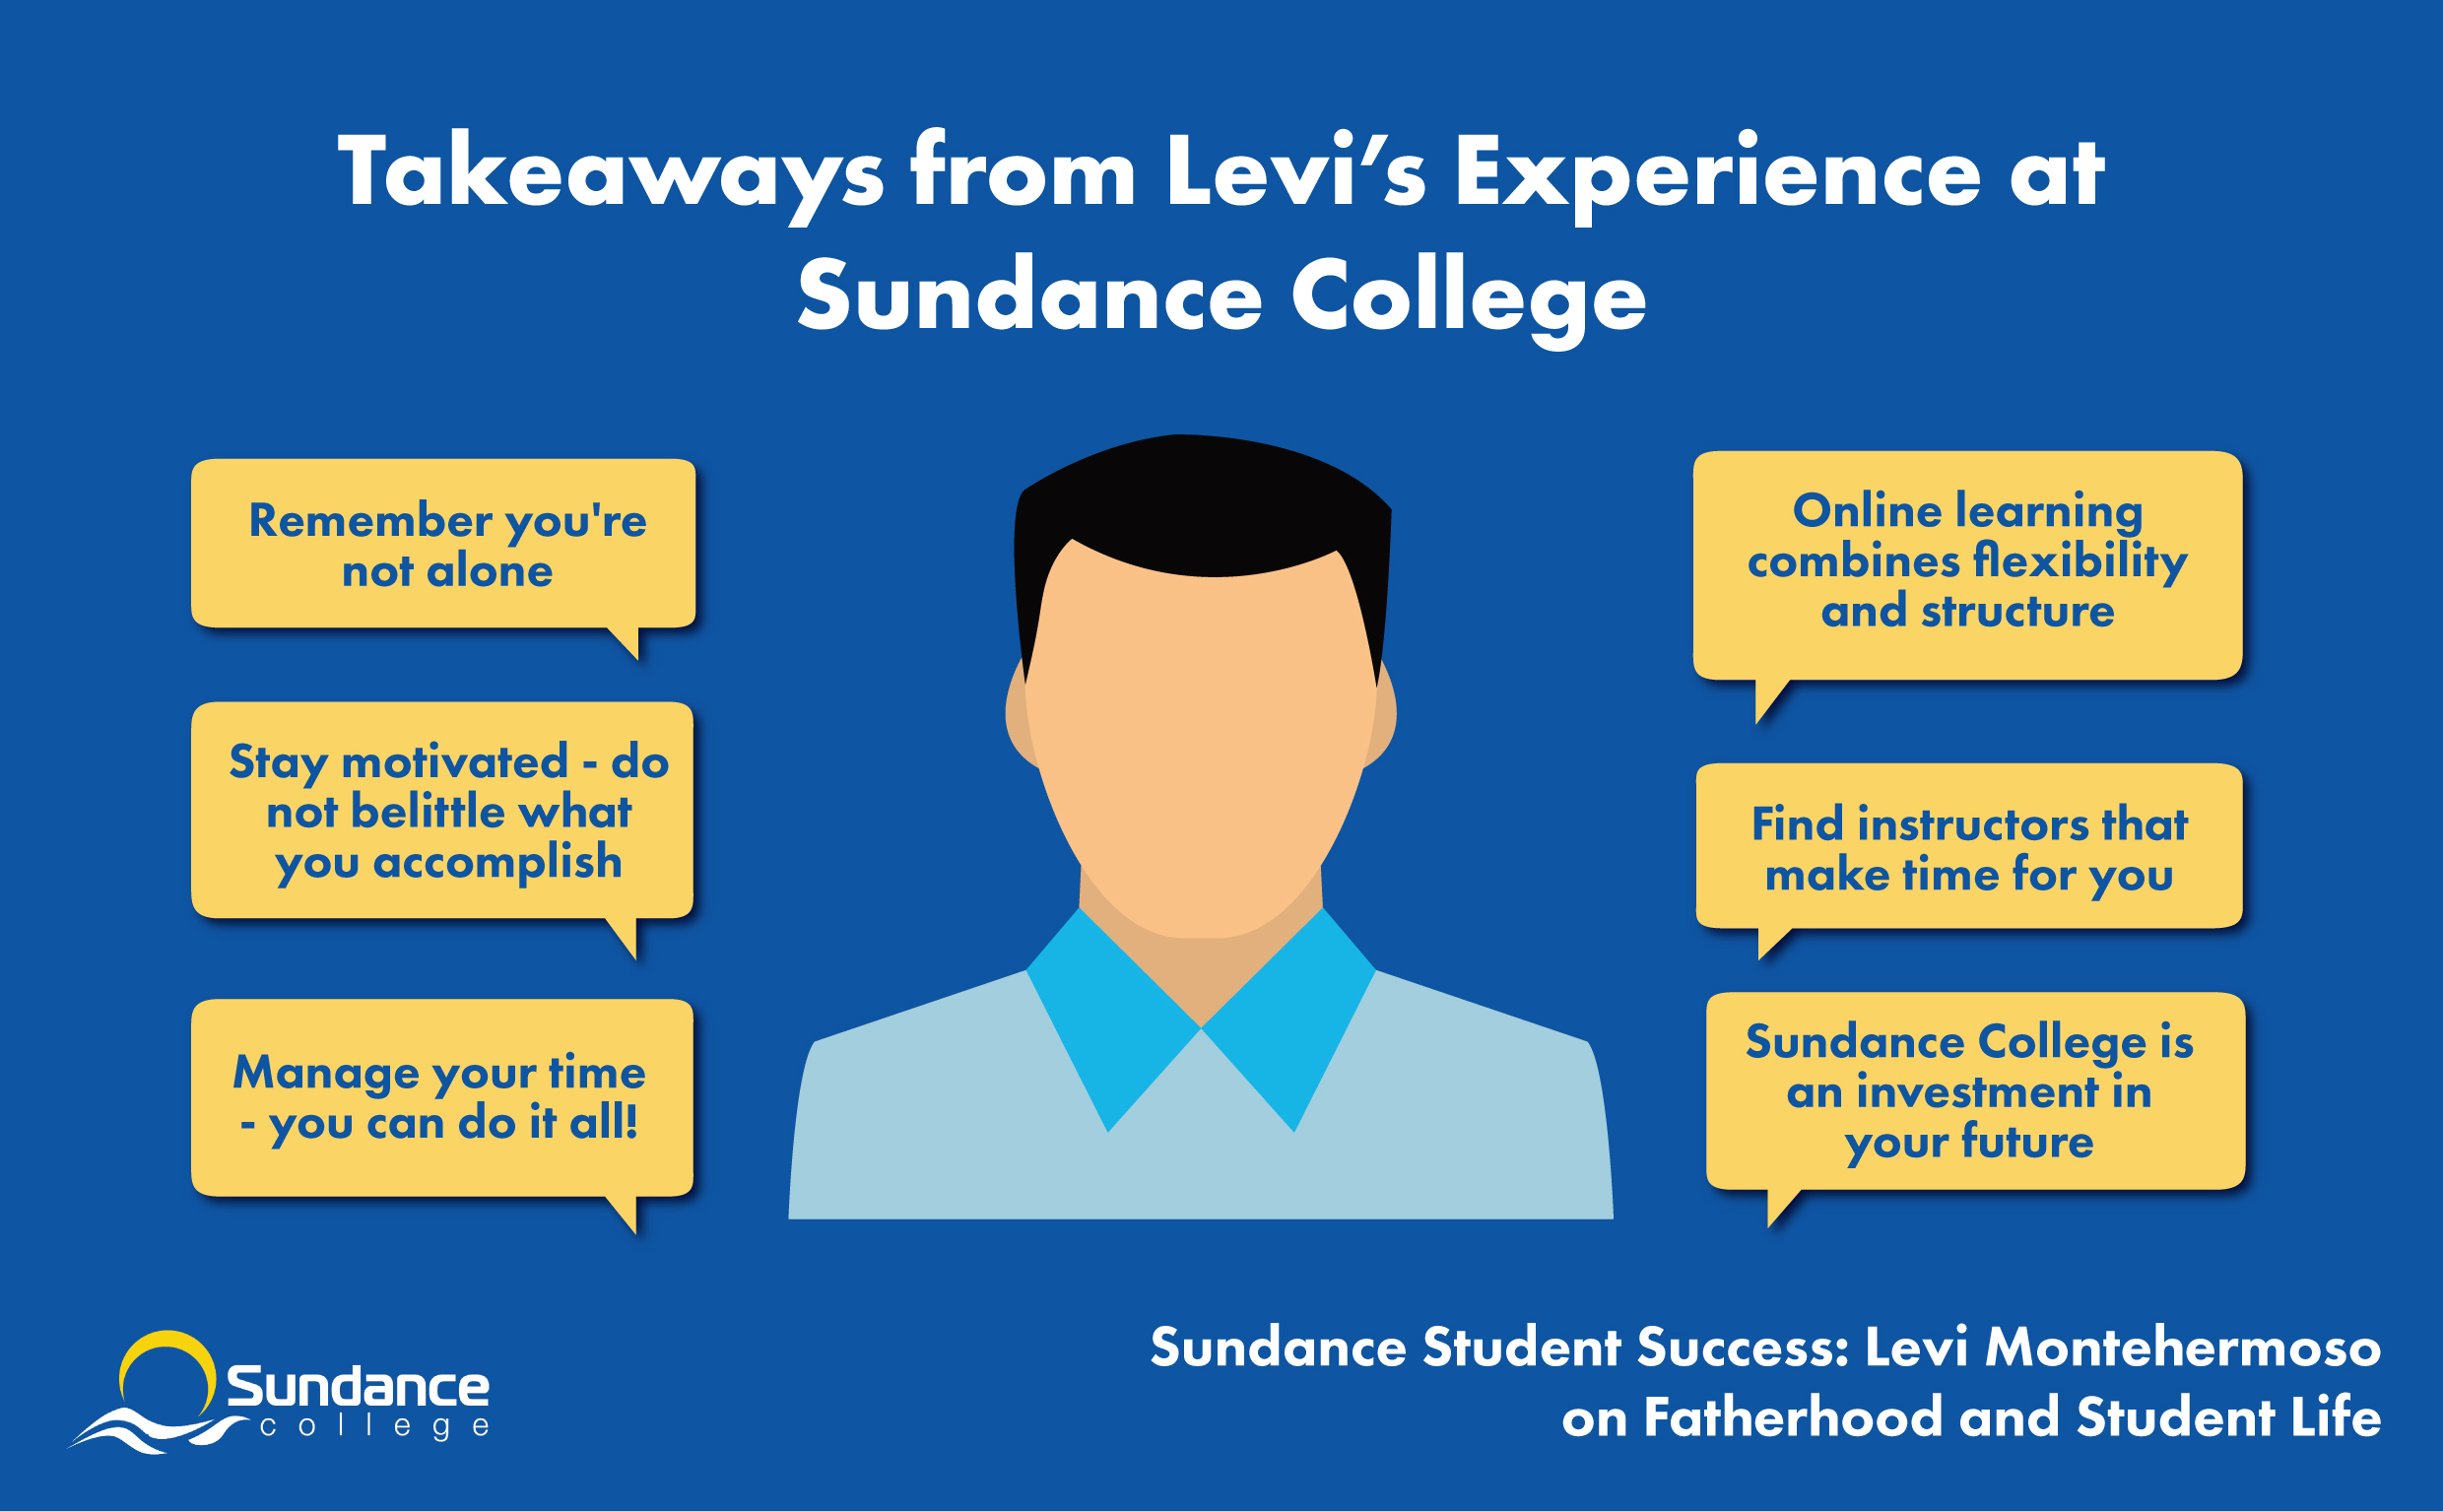 Takeaways From Levi's Experience at Sundance College